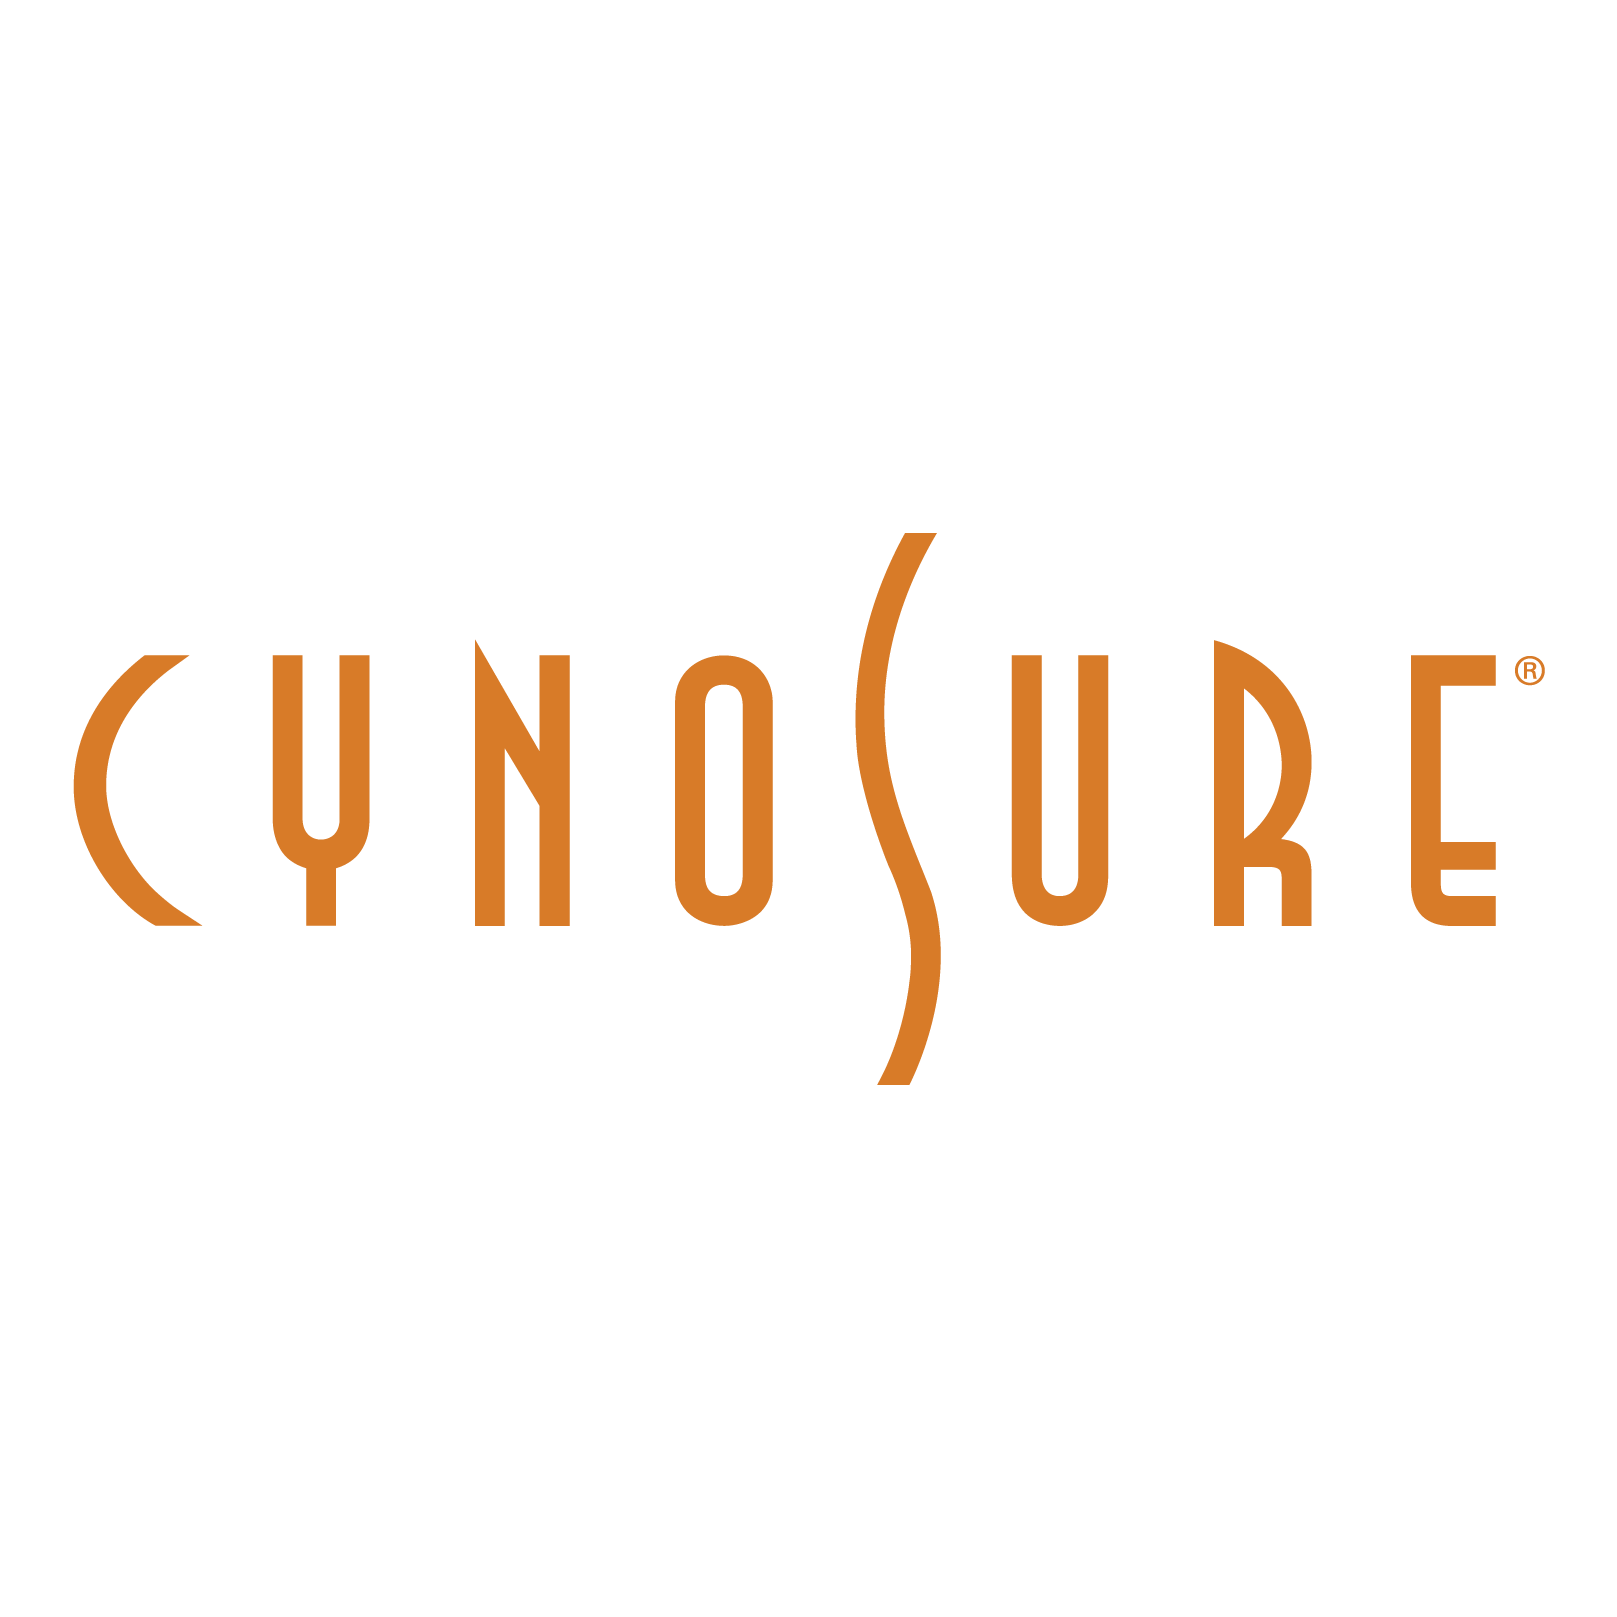 Cynosure Inc, manufactures aesthetic laser technology.  We are looking to add talented professionals to our growing organization.